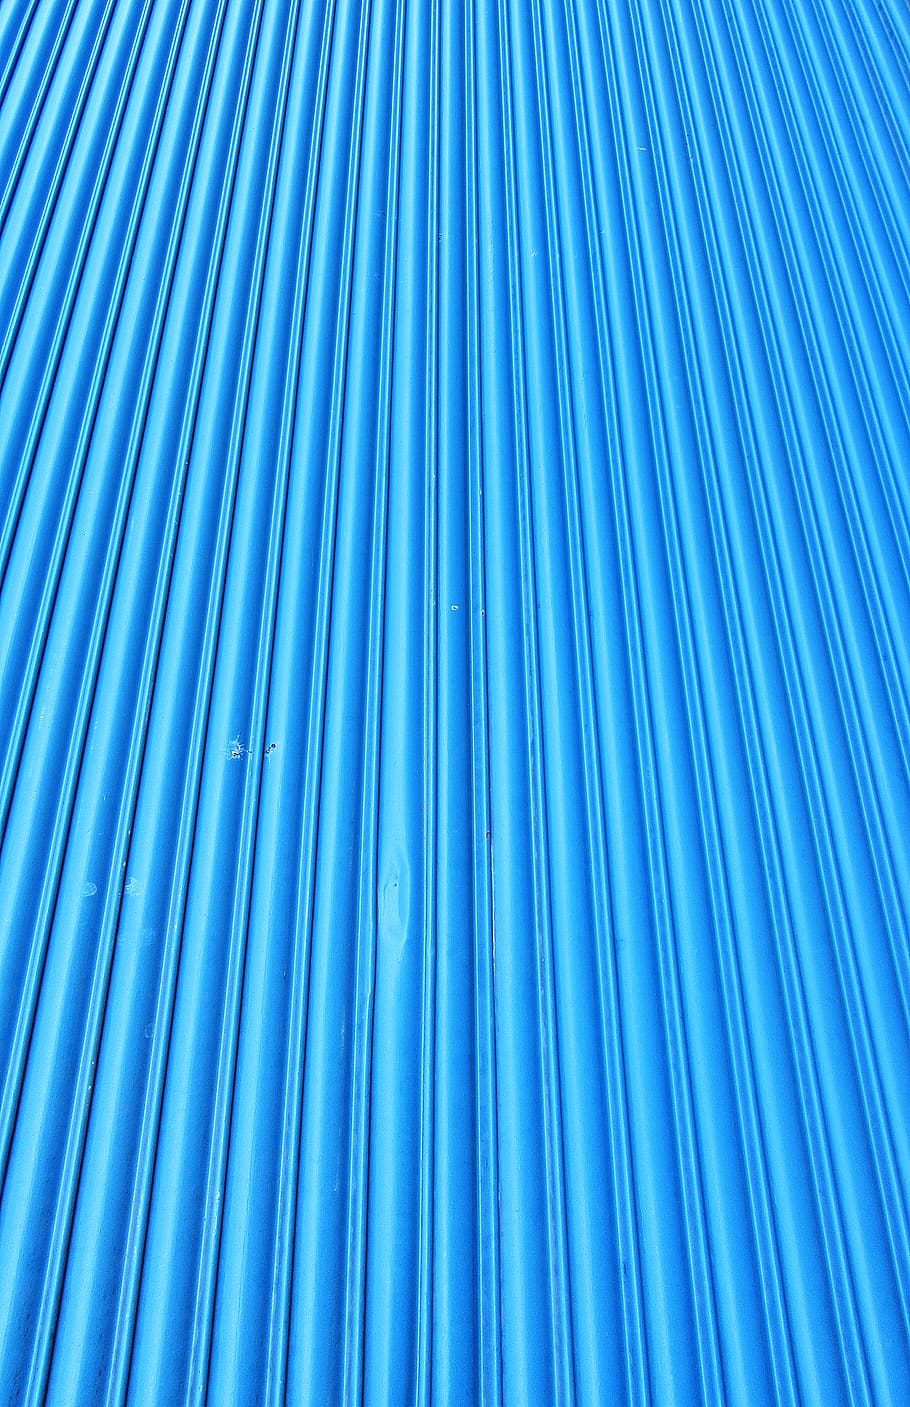 blue, lines, painted metal, corrugations, industrial, background